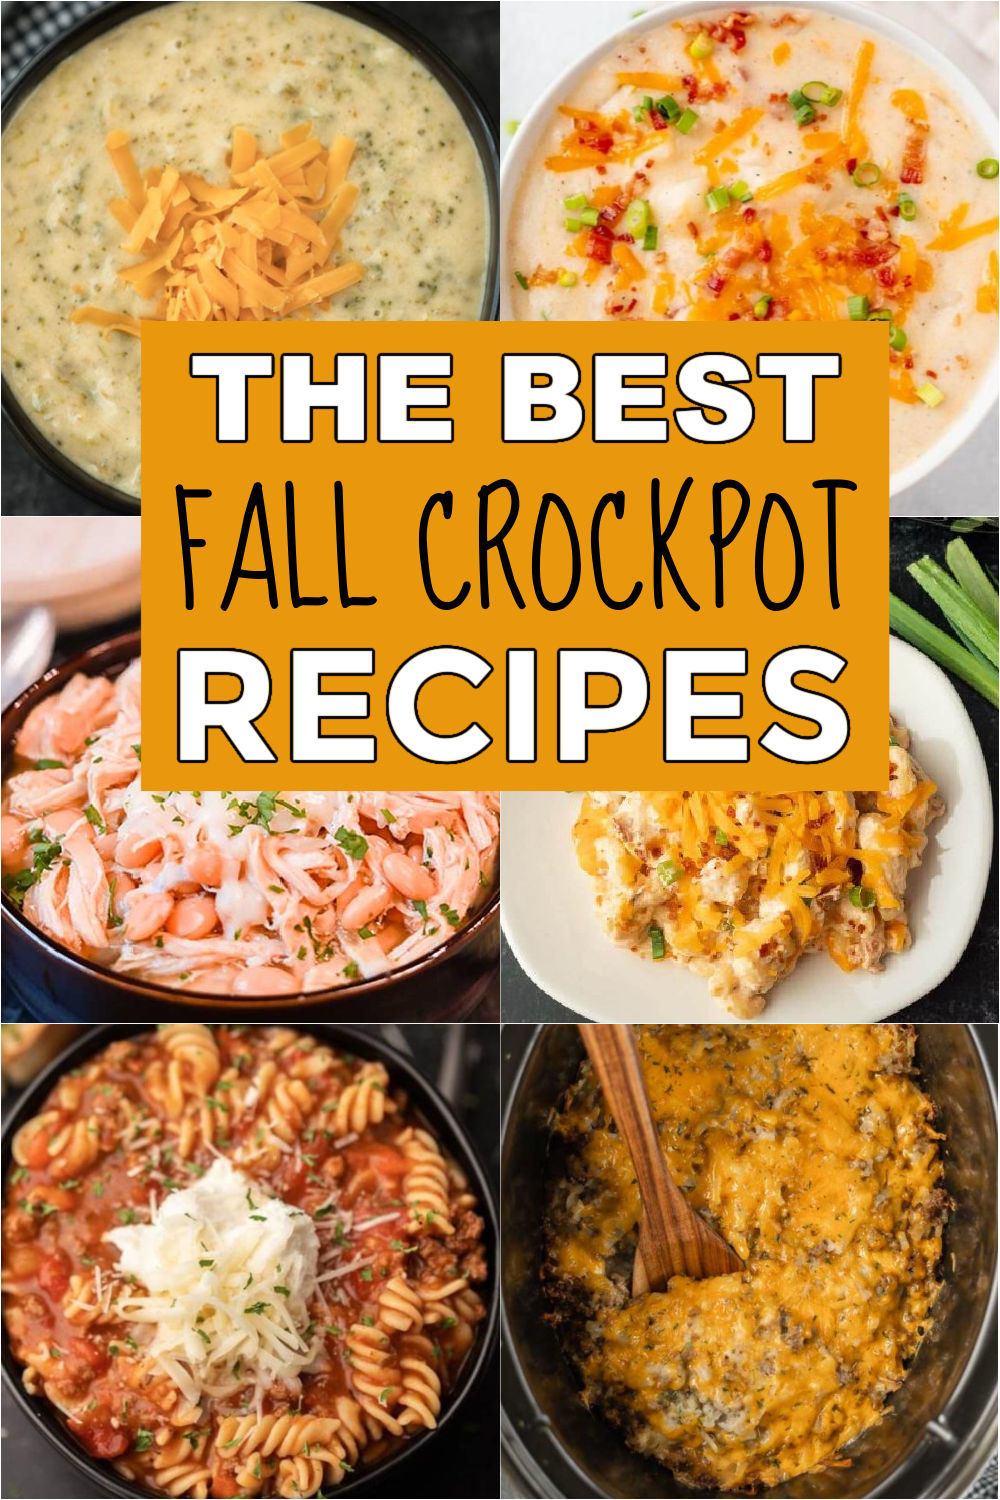 I produced 3 quick fall Crock-Pot meals for chilly days